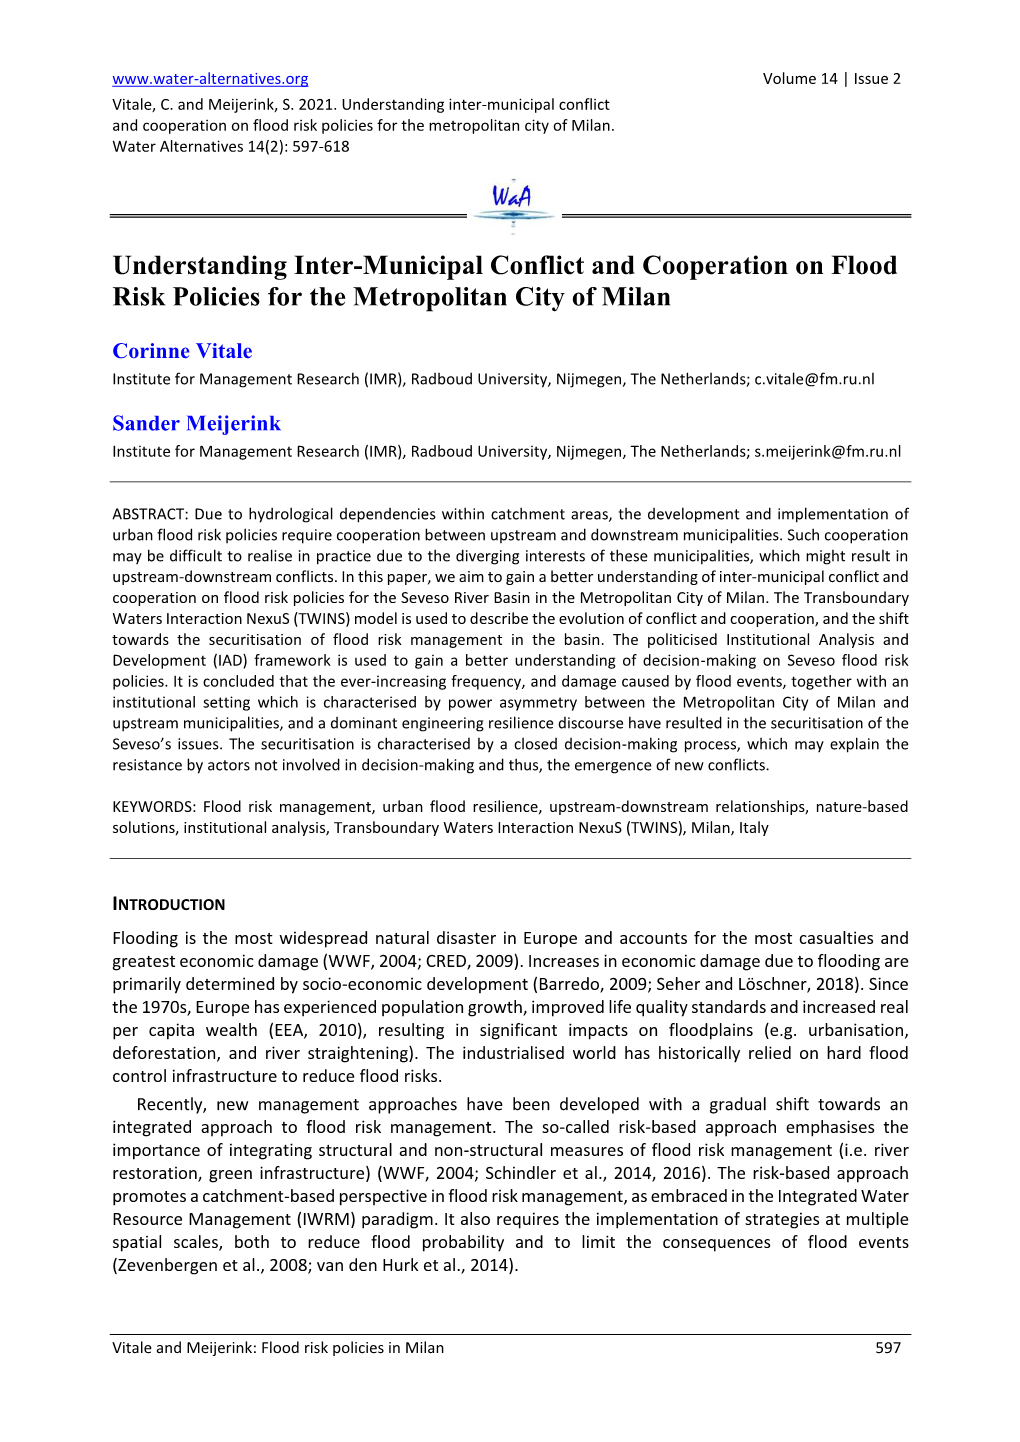 Understanding Inter-Municipal Conflict and Cooperation on Flood Risk Policies for the Metropolitan City of Milan